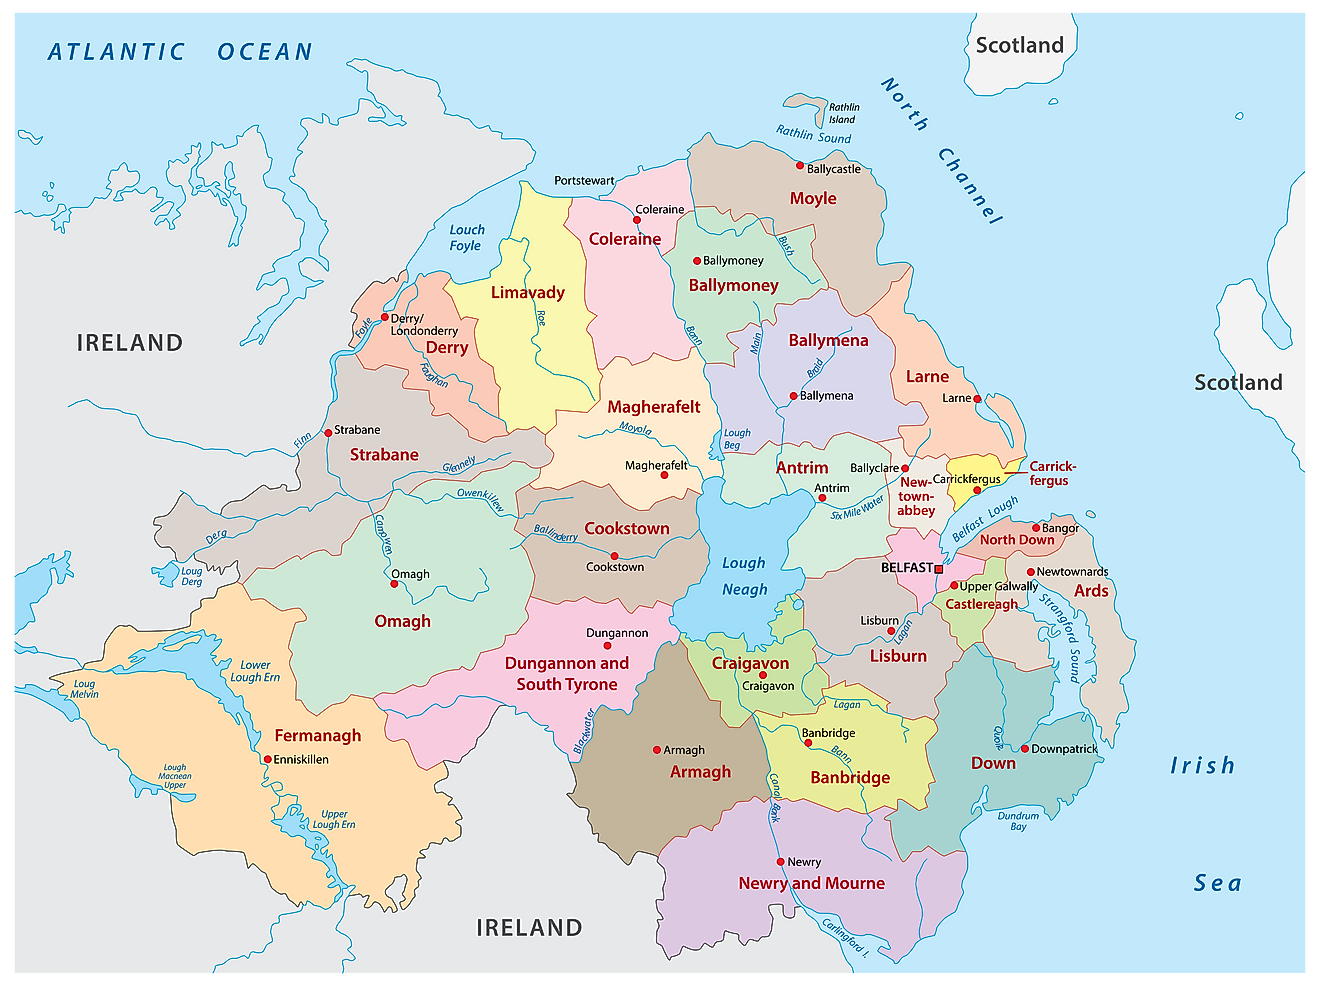 Administrative Map of Northern Ireland showing its various districts and its capital city - Belfast